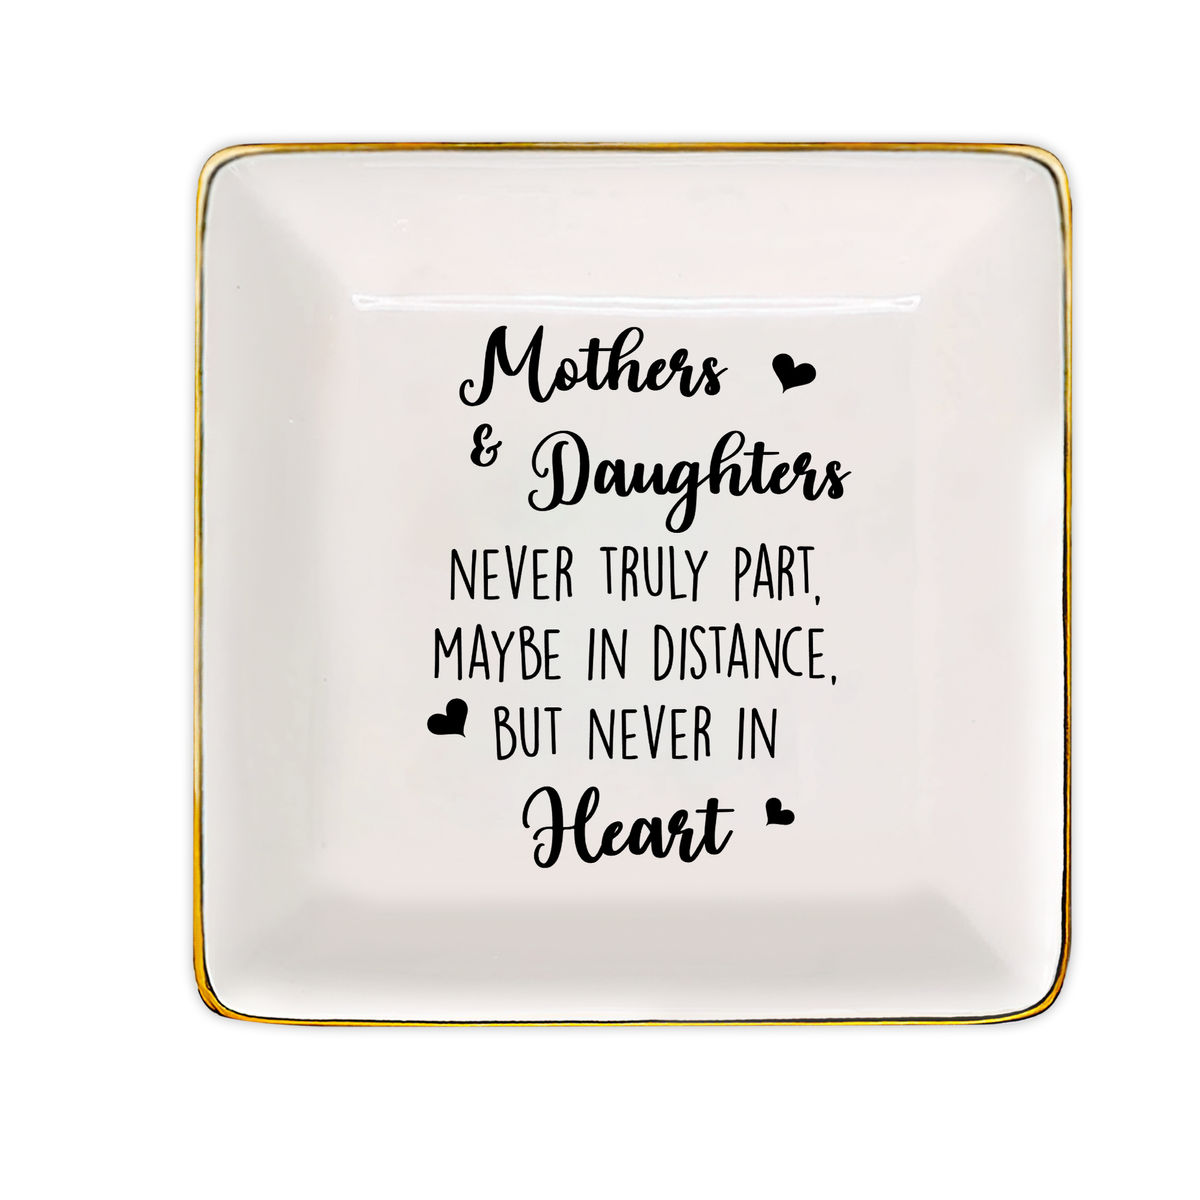 Jewelry Tray - Gift for Mom, Daughter, Mother's Day Gift for Mom - Mothers & Daughters never truly part, maybe in distance, but never in heart - Personalized Jewelry Tray_5